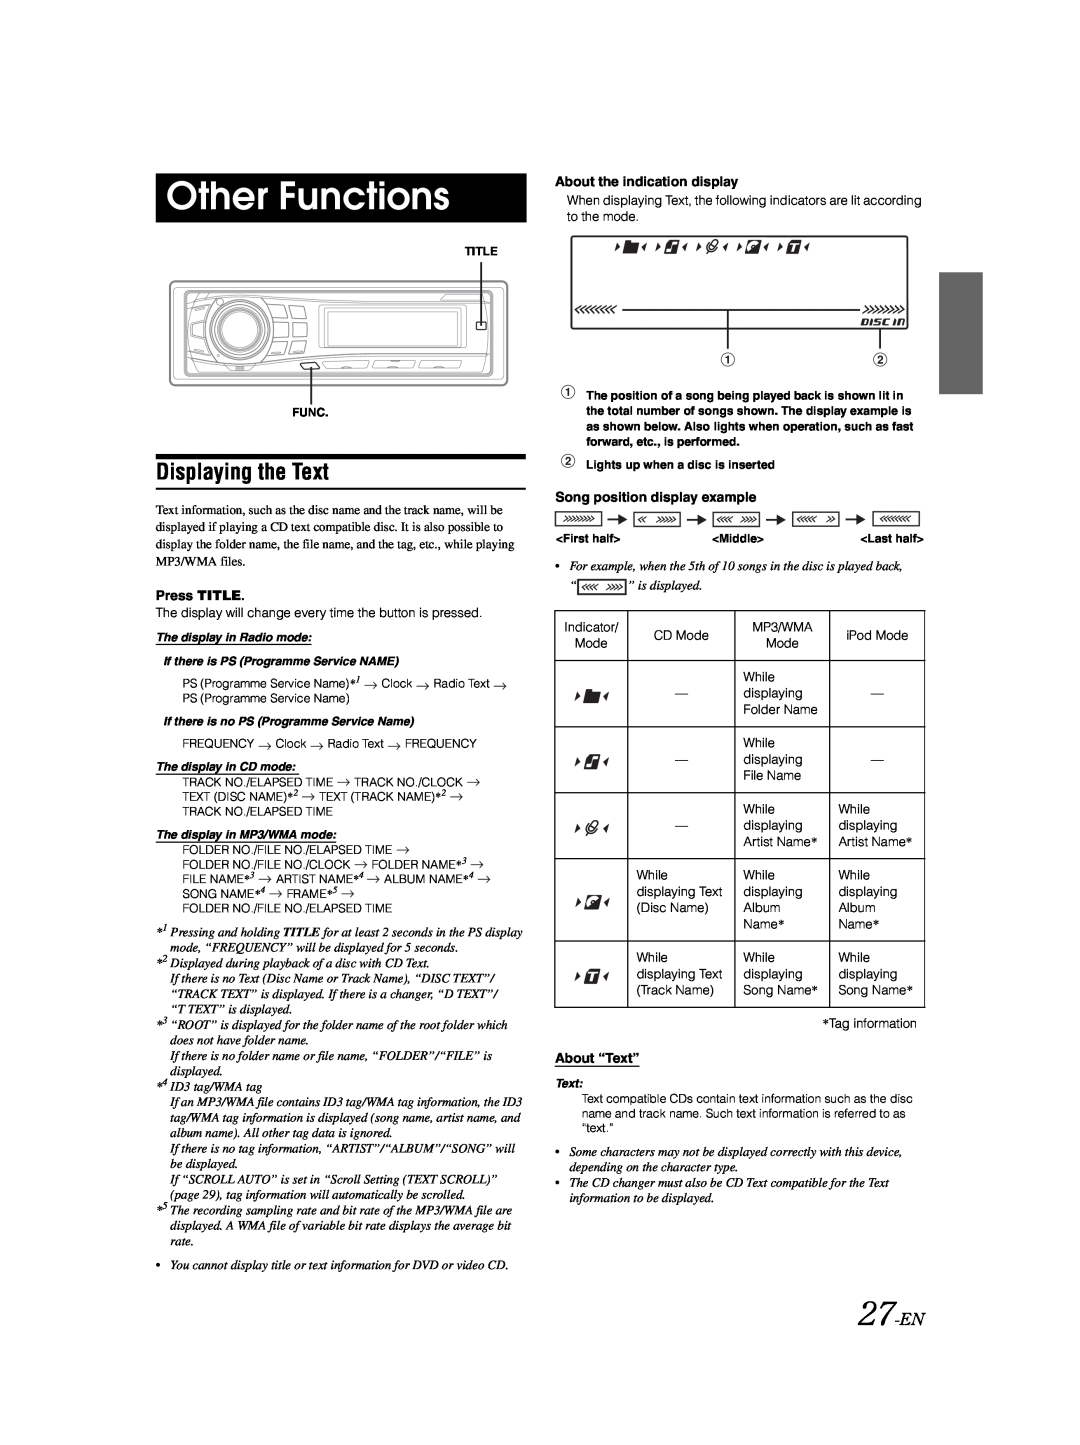 Alpine DVA-9861Ri owner manual Other Functions, Displaying the Text, 27-EN 